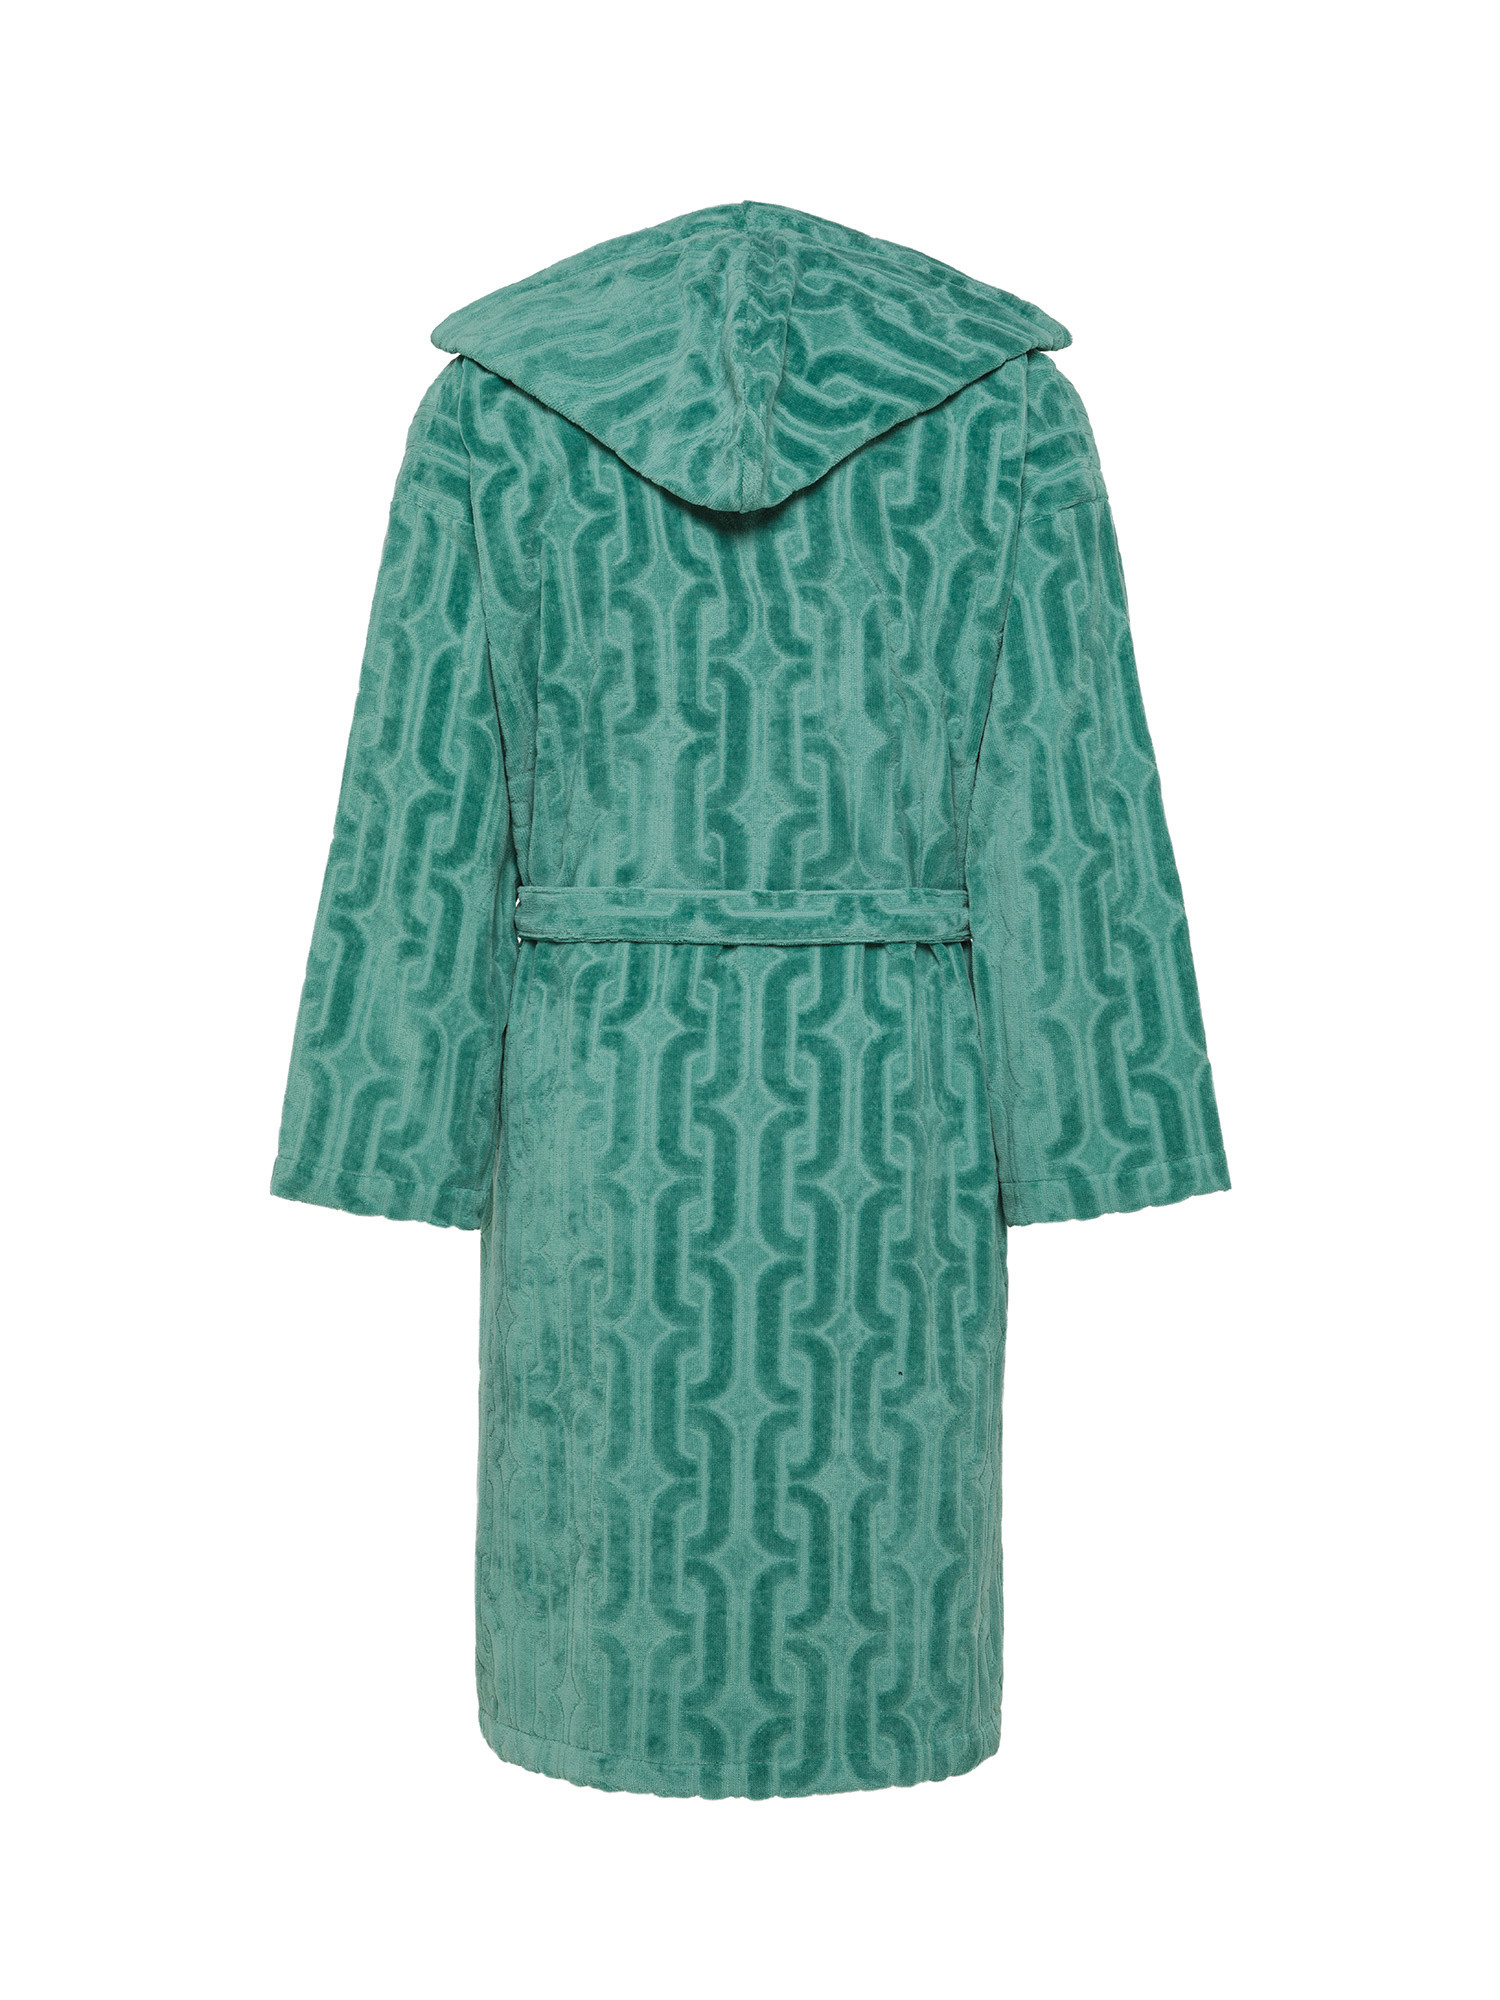 Cotton velour bathrobe with geometric relief pattern, Green, large image number 1